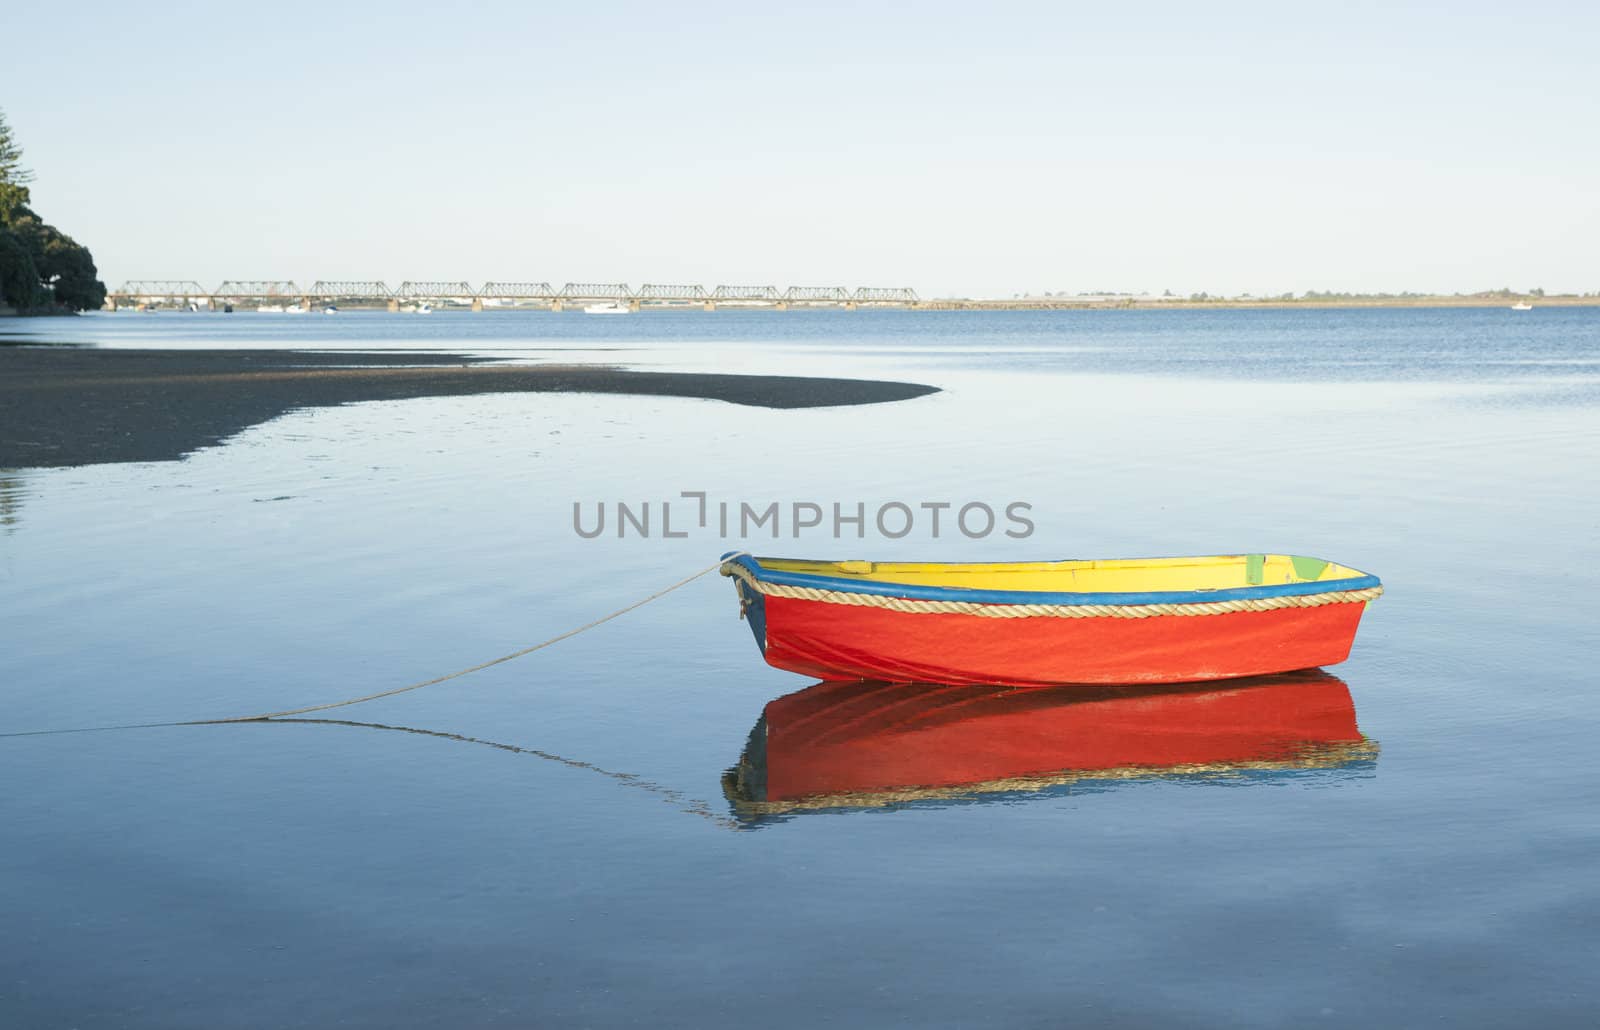 Small bright red boat floating on calm water.